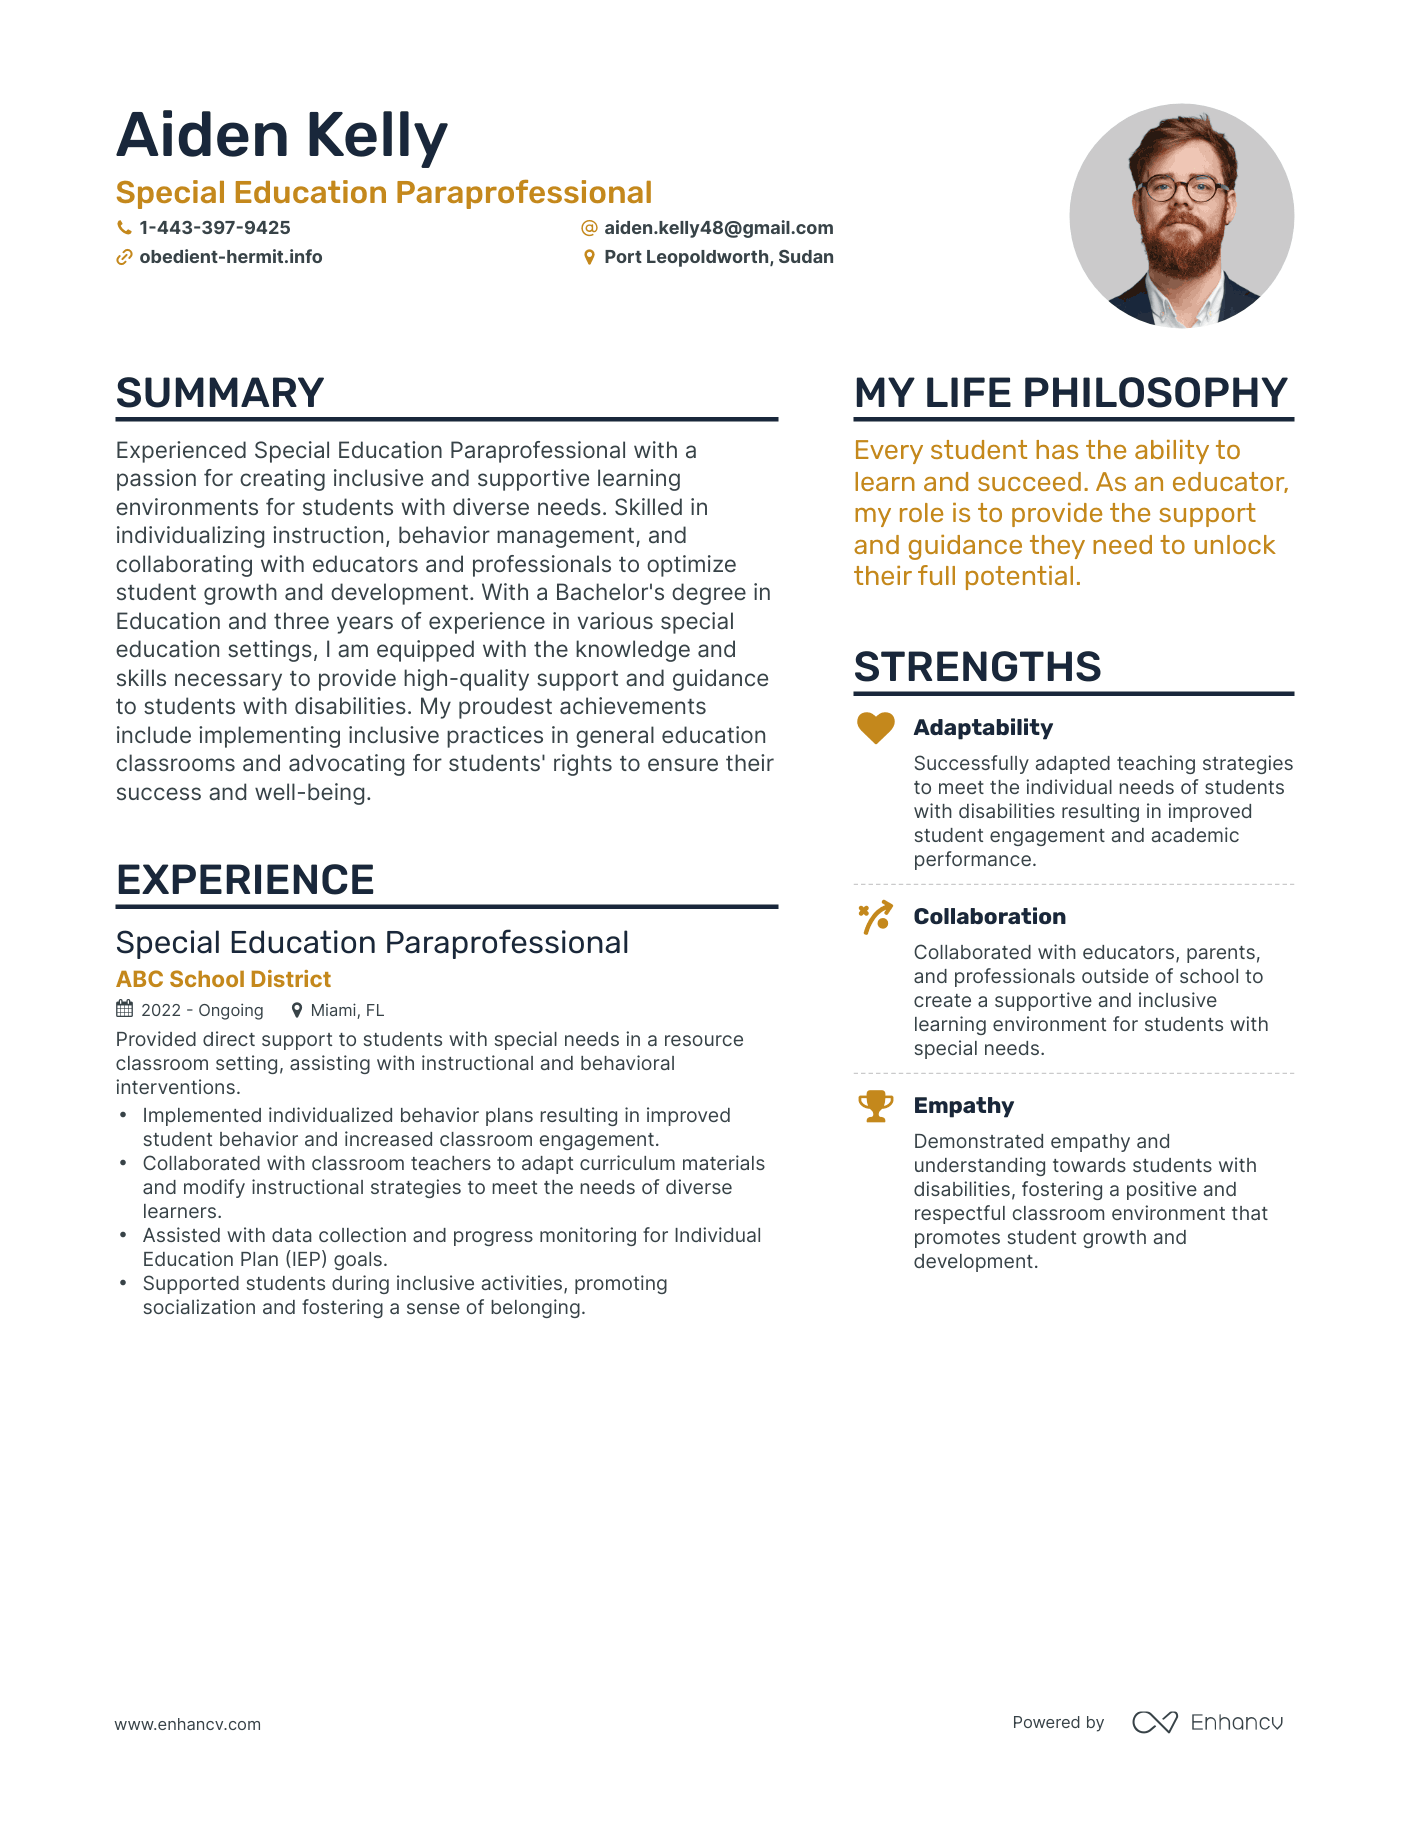 Special Education Paraprofessional resume example